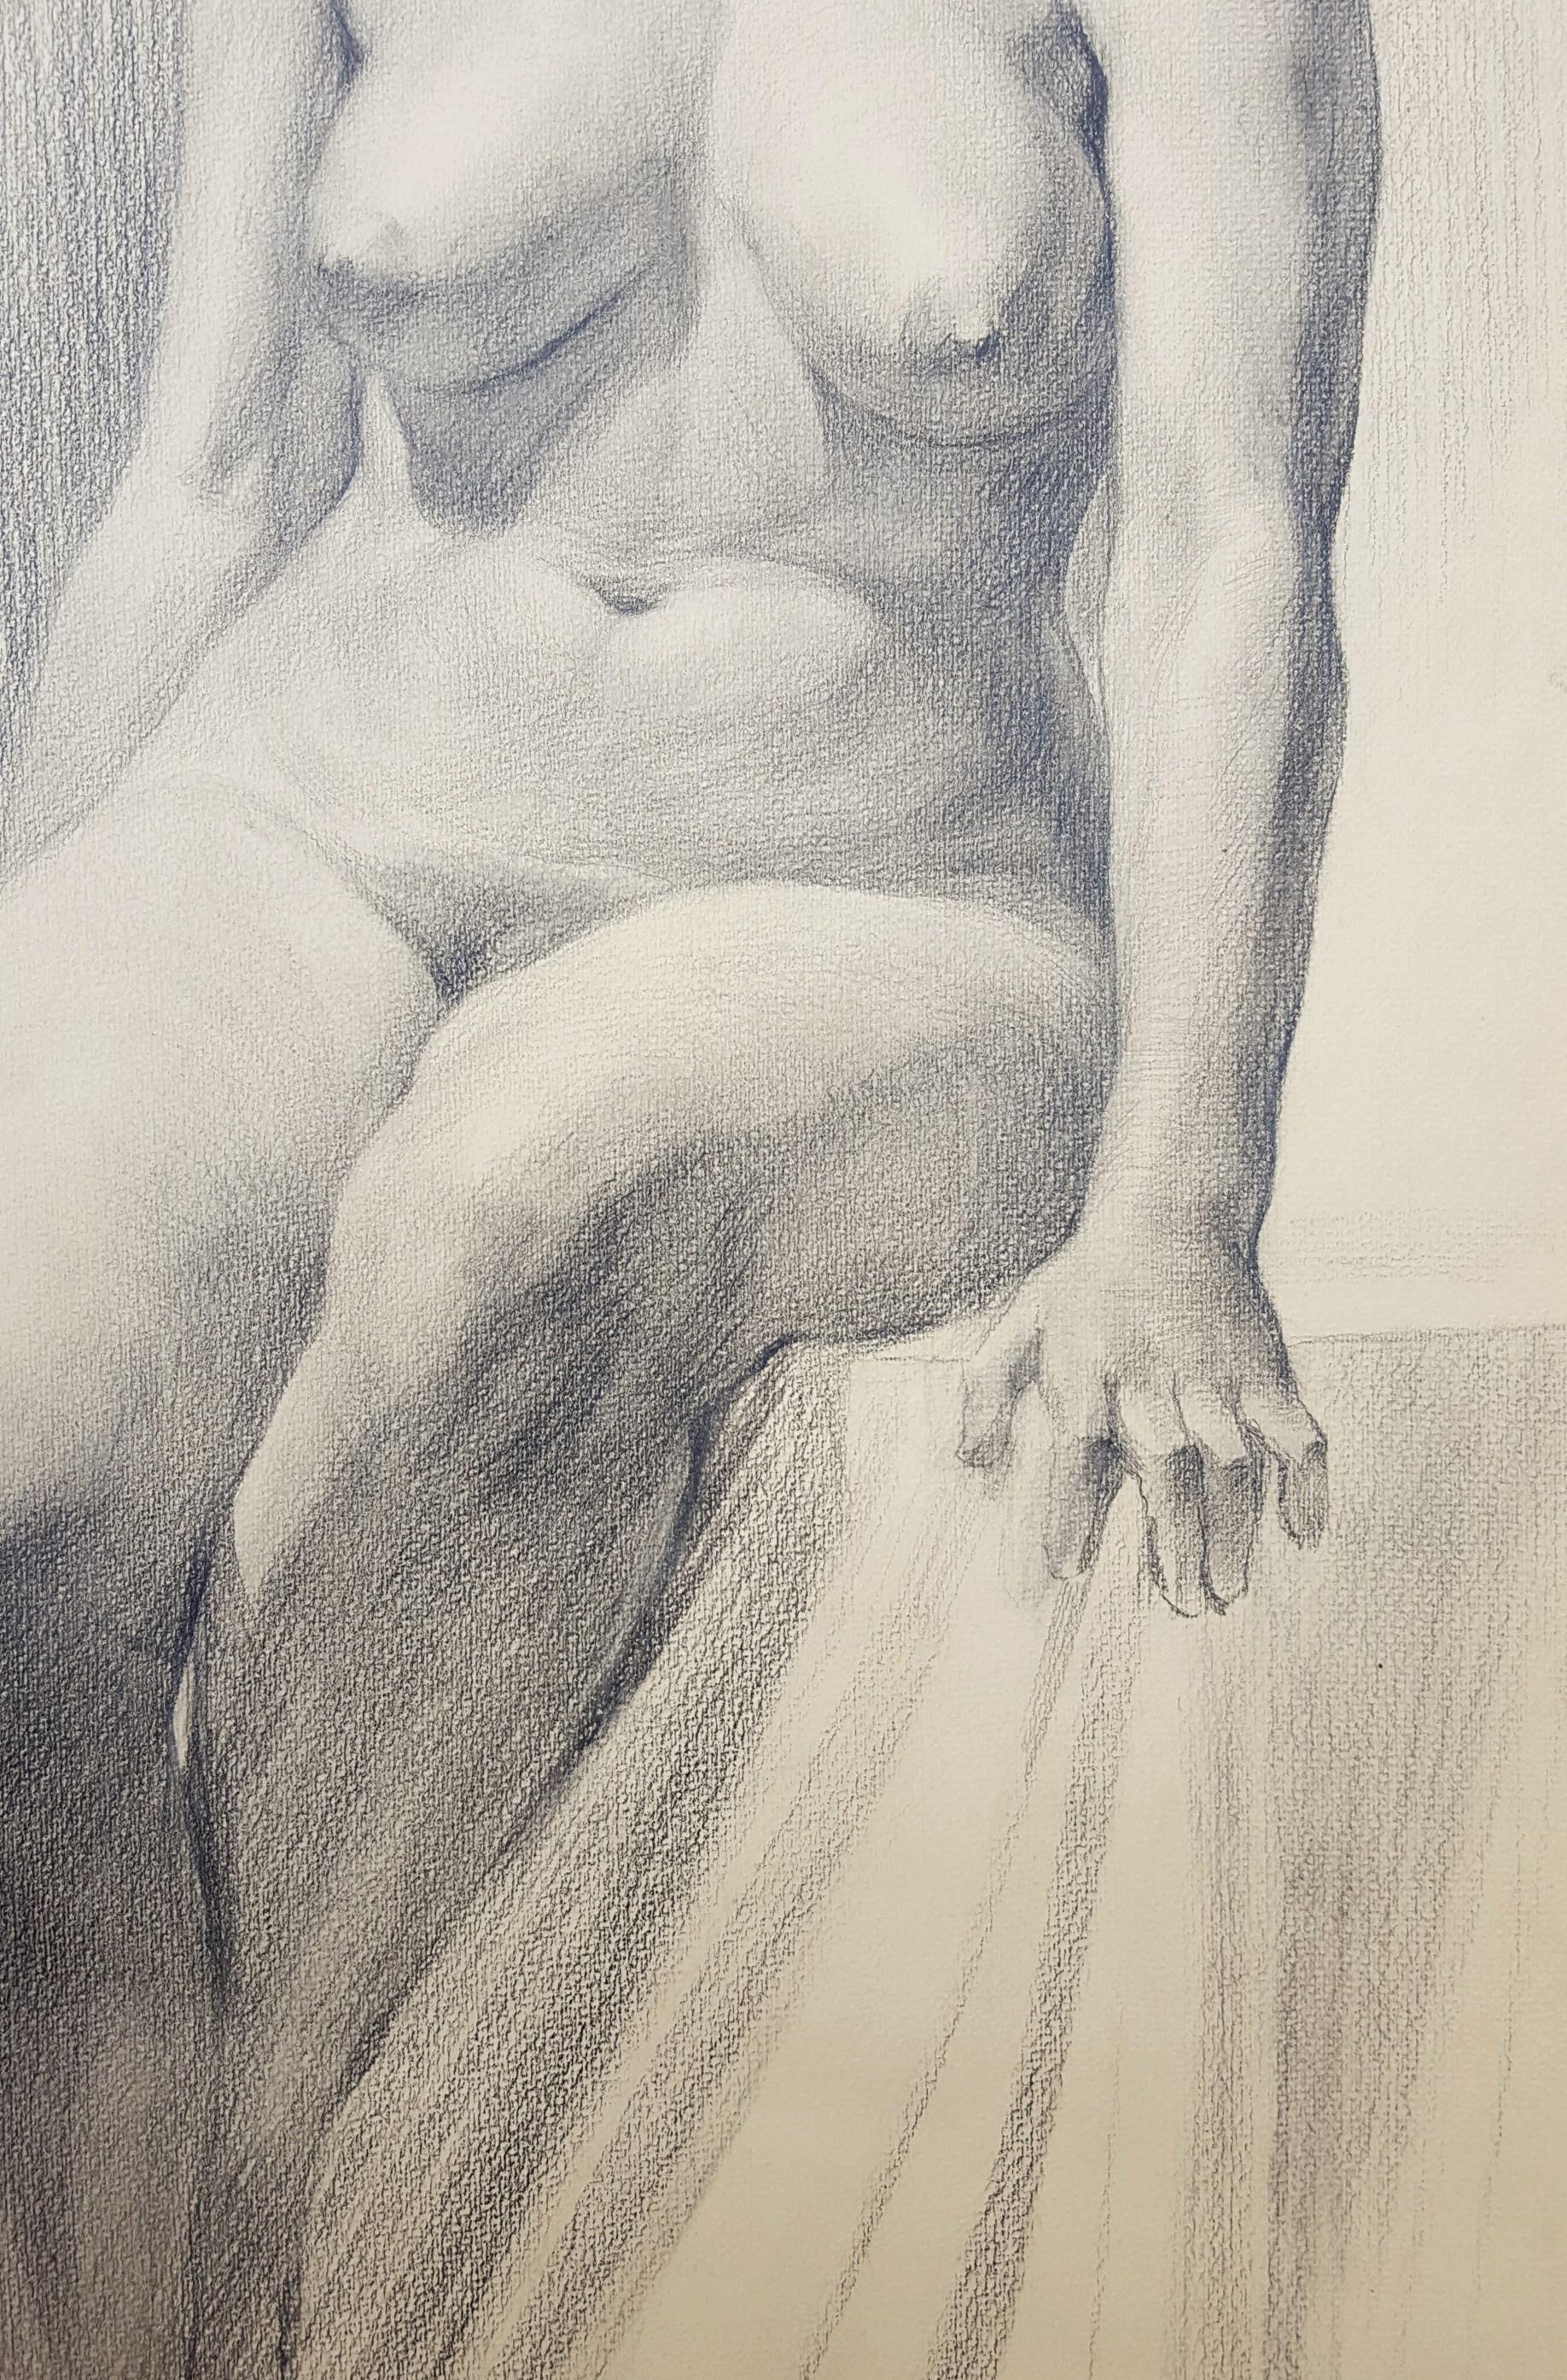 Zittend Naakt (Seated Nude) /// Figurative Girl Lady Pencil Drawing Woman Art For Sale 8